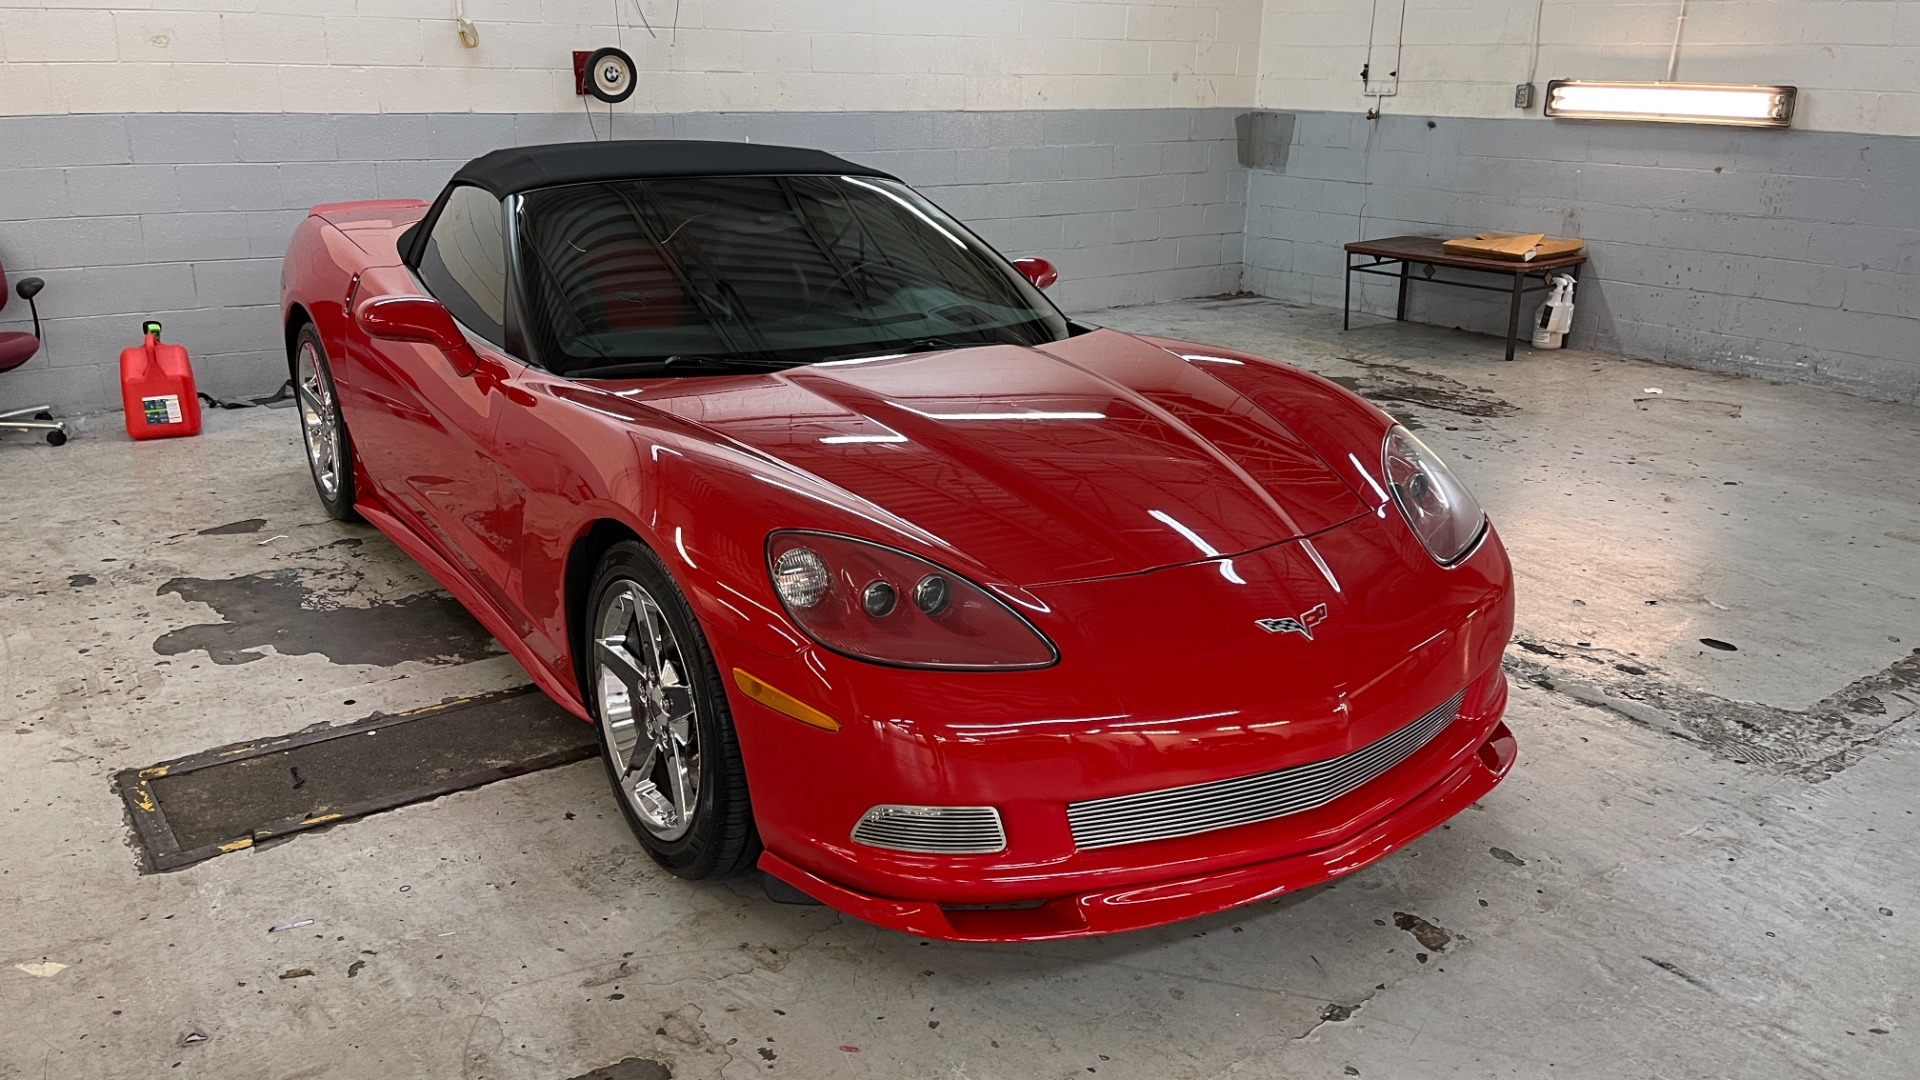 Used 2007 Chevrolet Corvette CONVERTIBLE / CORSA EXHAUST / AIRRAID INTAKE / 6.0L V8 / AUTOMATIC for sale $27,695 at Formula Imports in Charlotte NC 28227 18